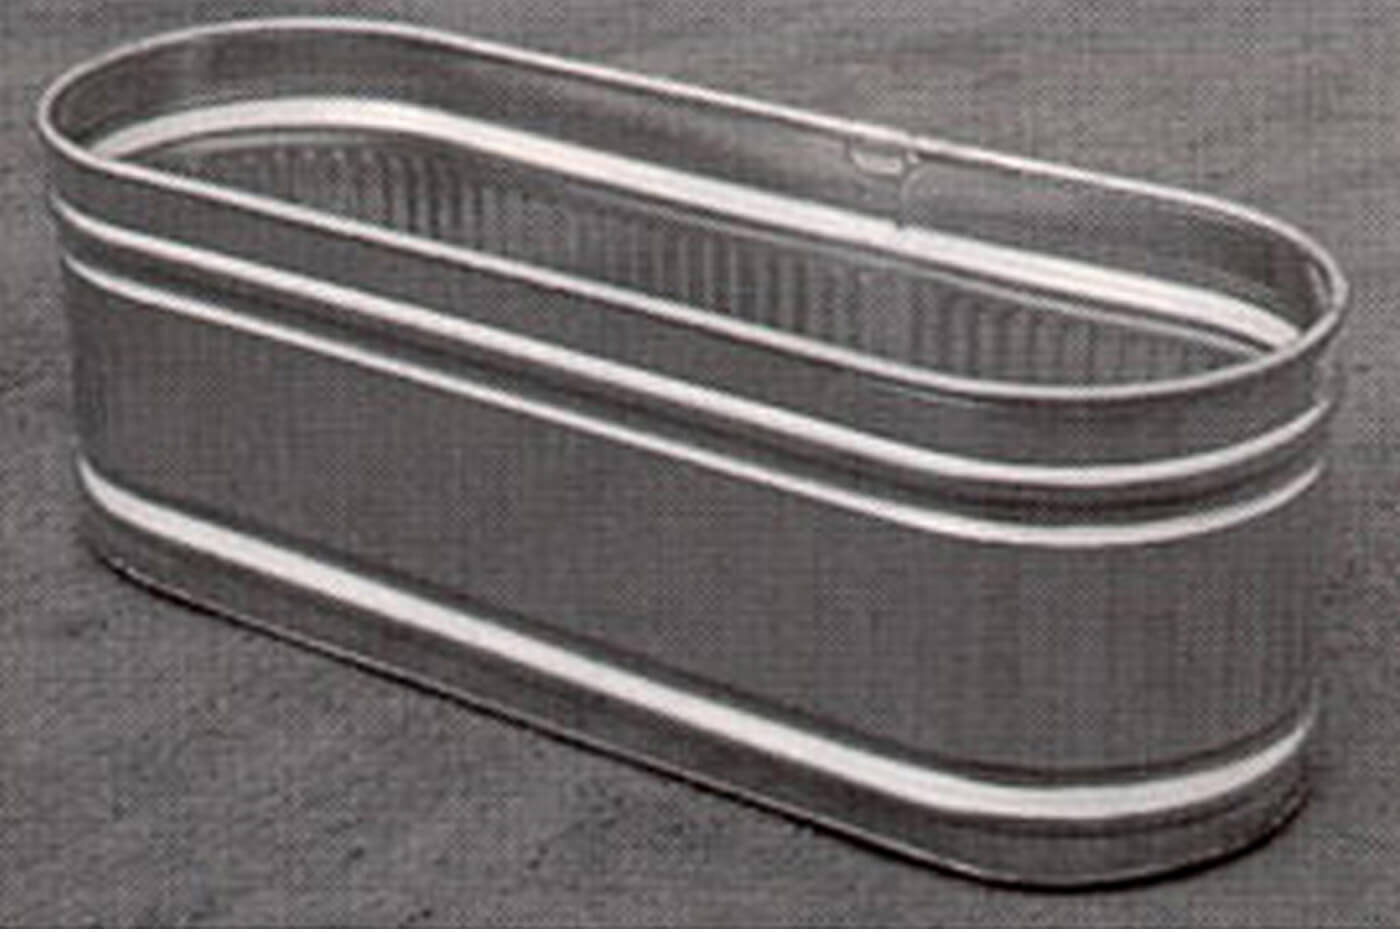 Galvanized Trough from Rona